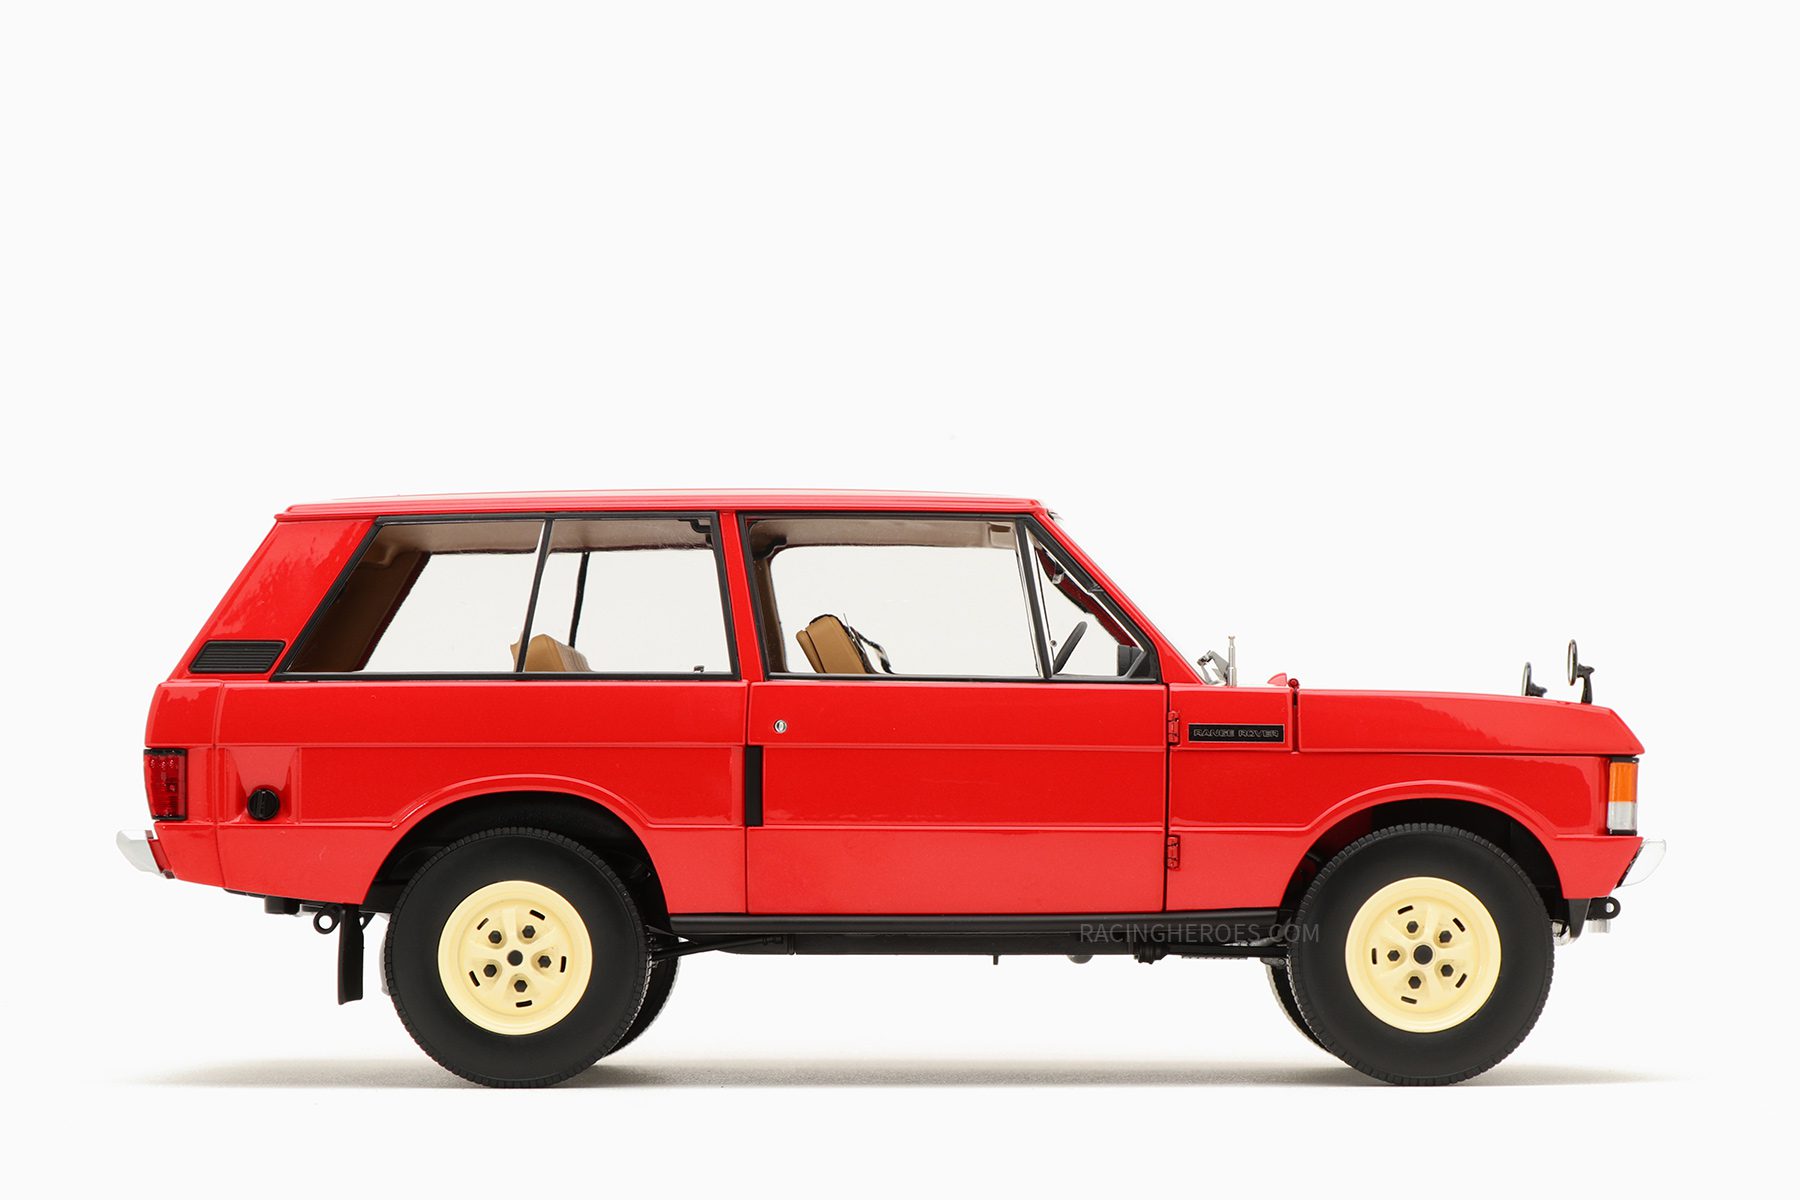 Range Rover Velar “First Prototype” 1969 1:18 by Almost Real